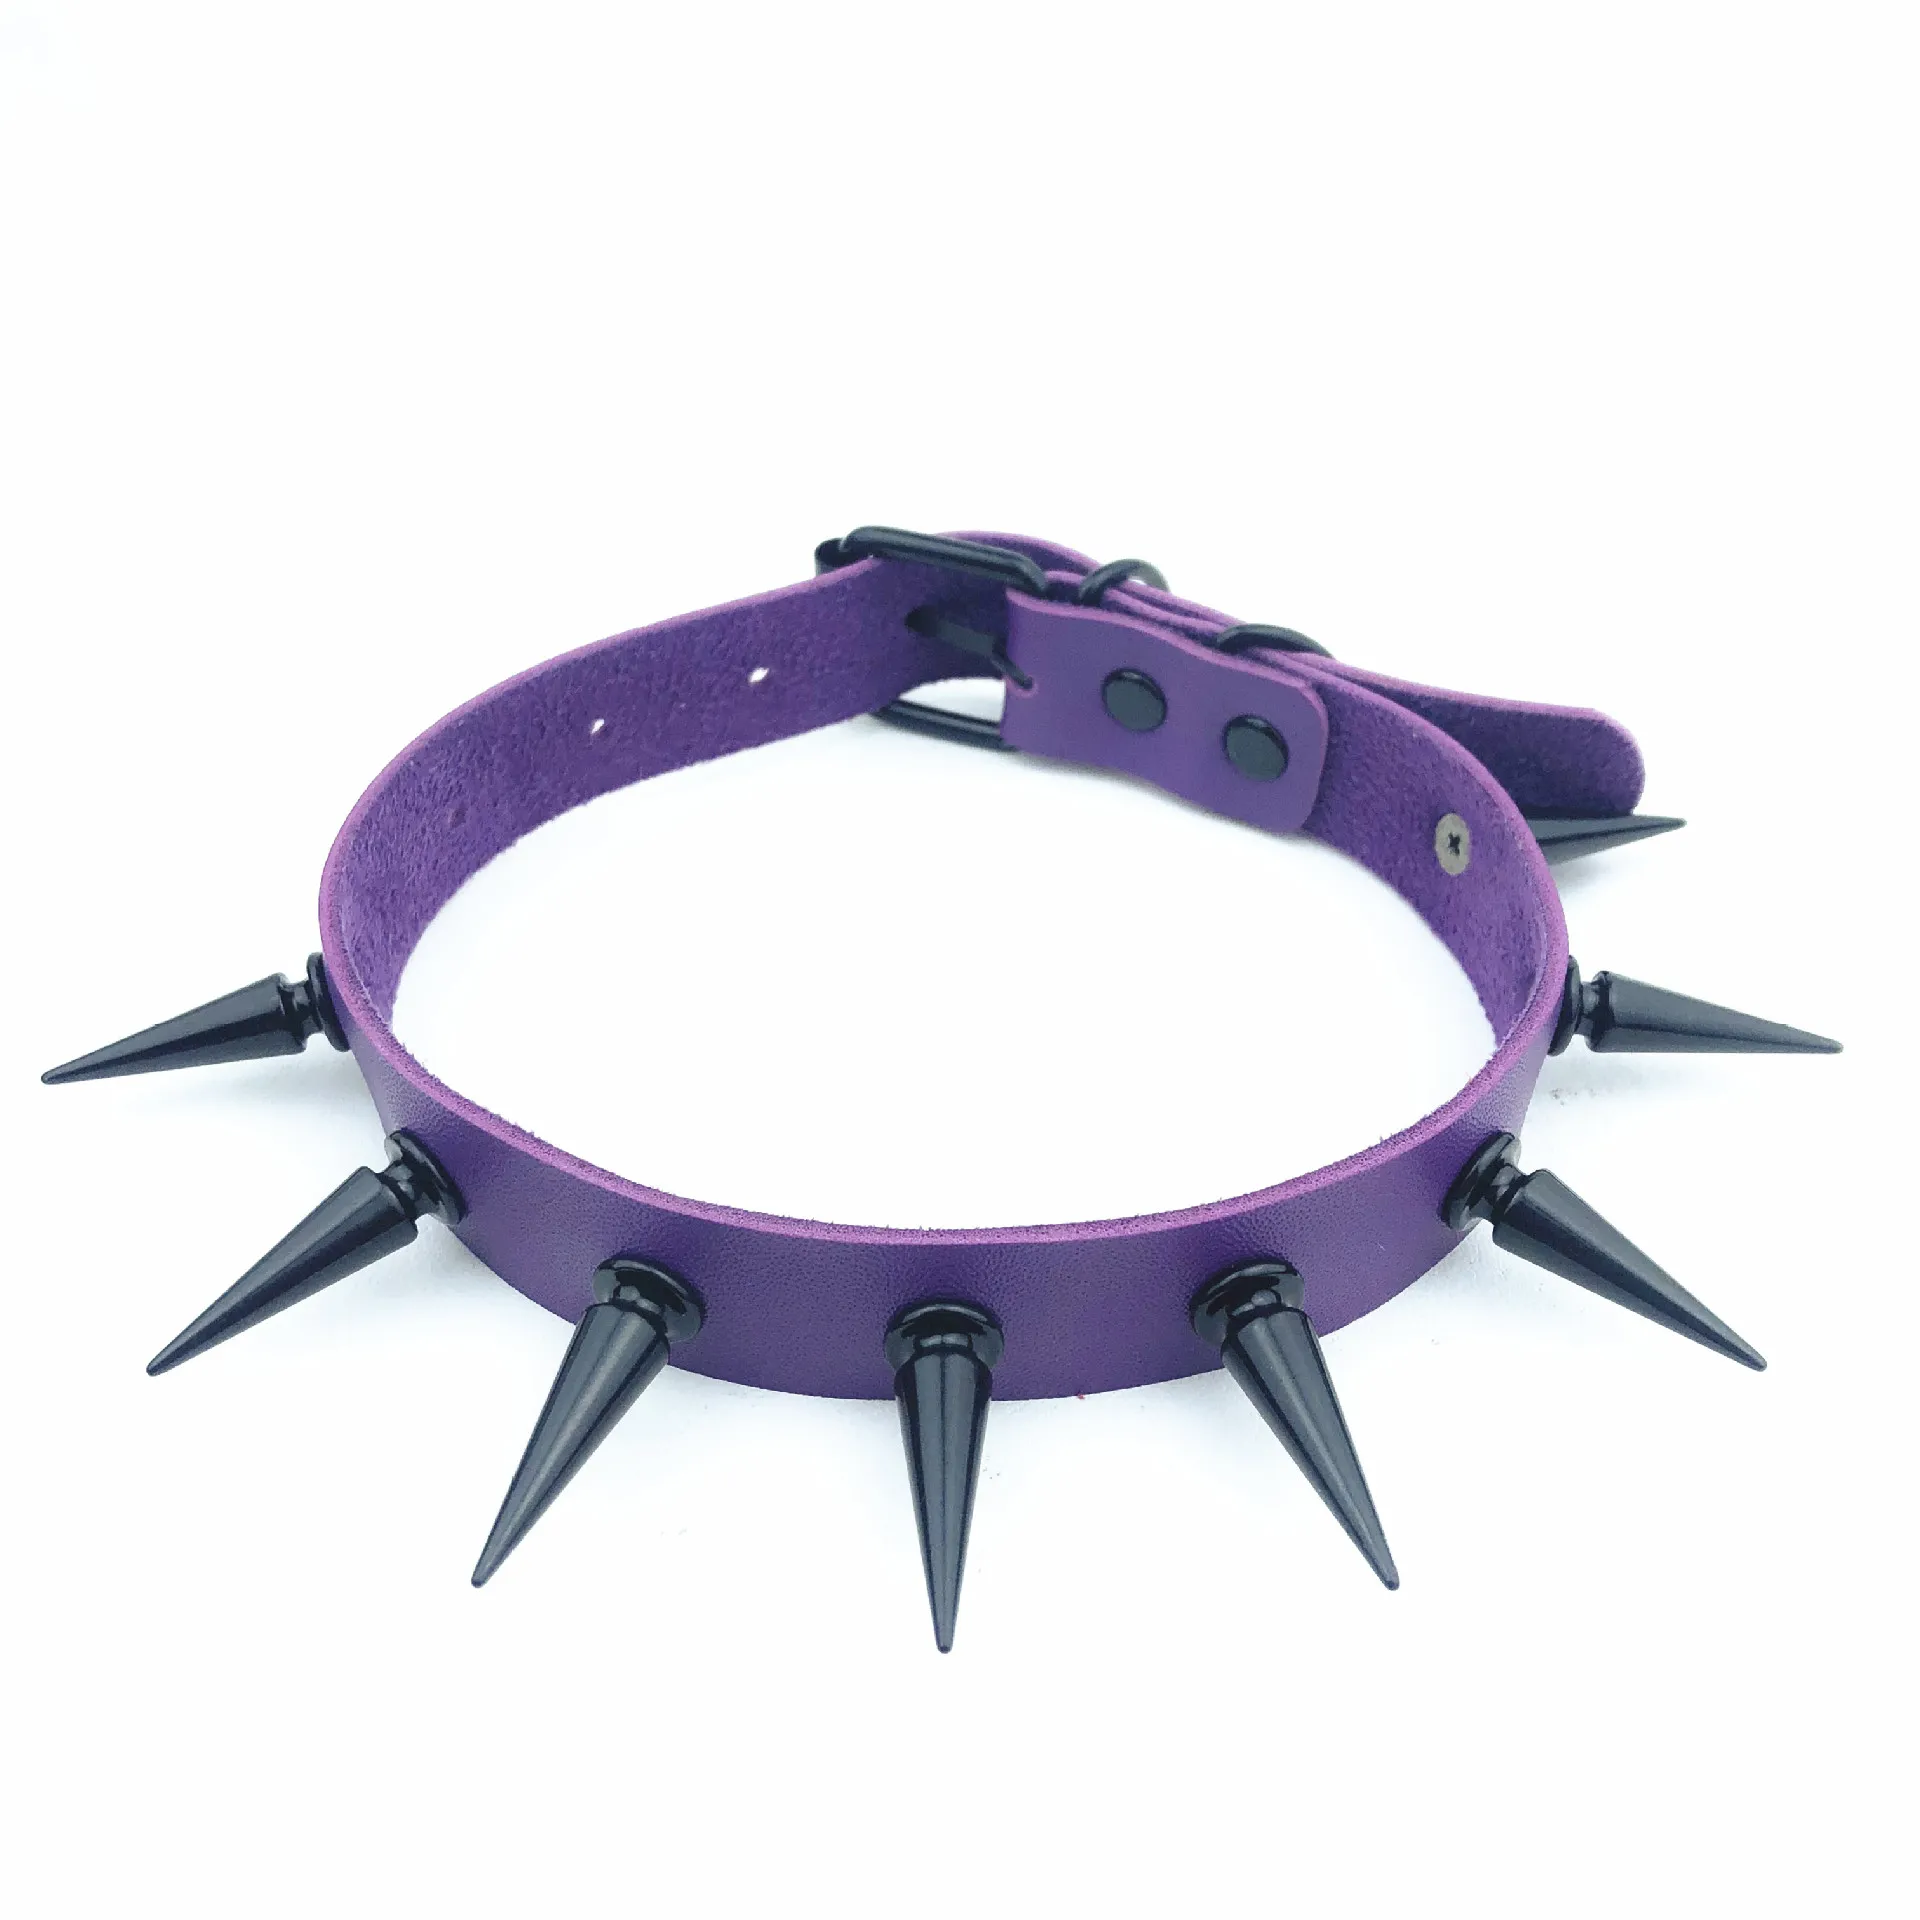 Chokers Gothic Black Spiked Punk Choker Collar Spikes Rivets Studded Chocker Necklace For Women Men Bondage Cosplay Goth Je Dhgarden Dhuay